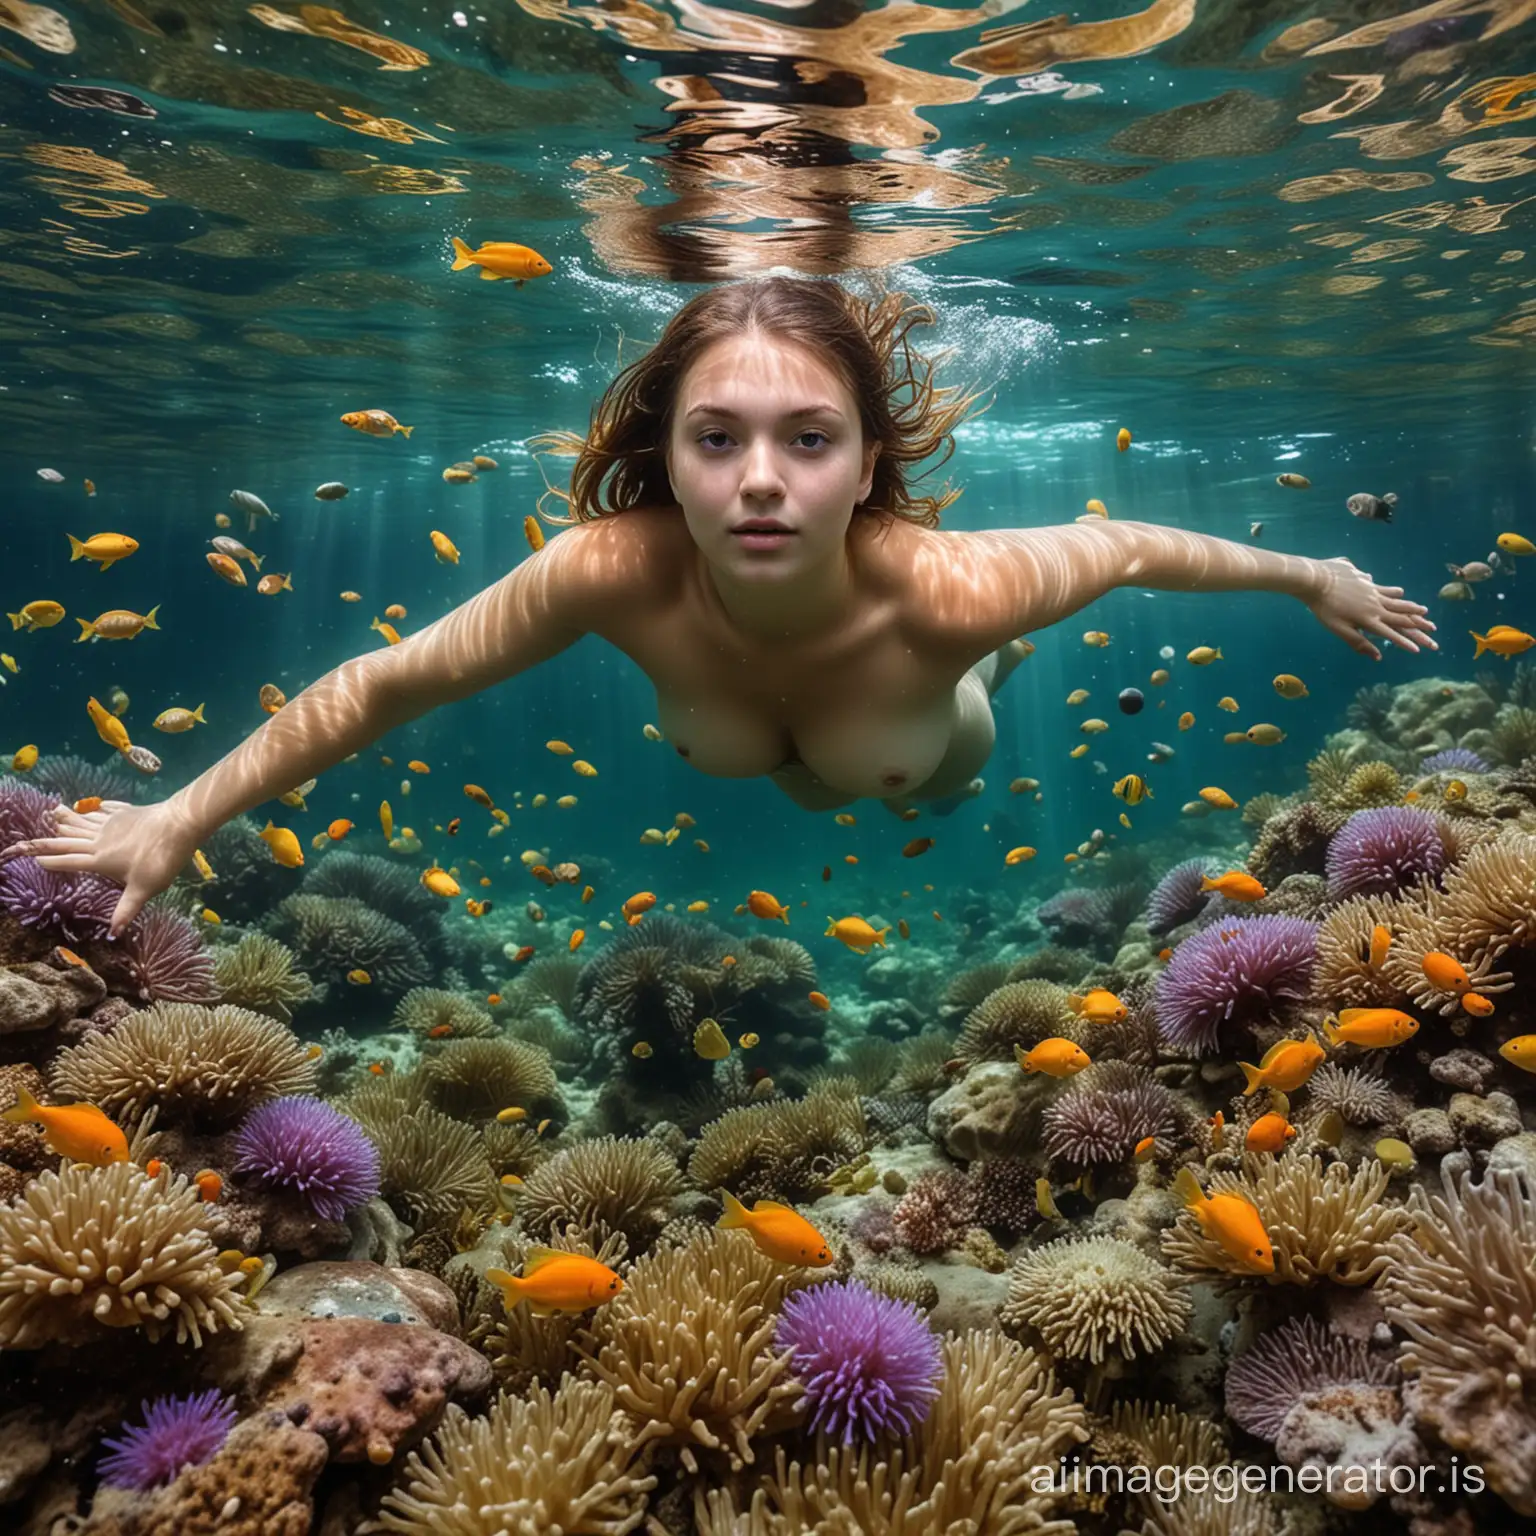 A very beautiful naked girl, Chubby, swimming underwater in the middle of many tropical fish of different colors, the photo is underwater, sea anemones, algae, sea urchins 